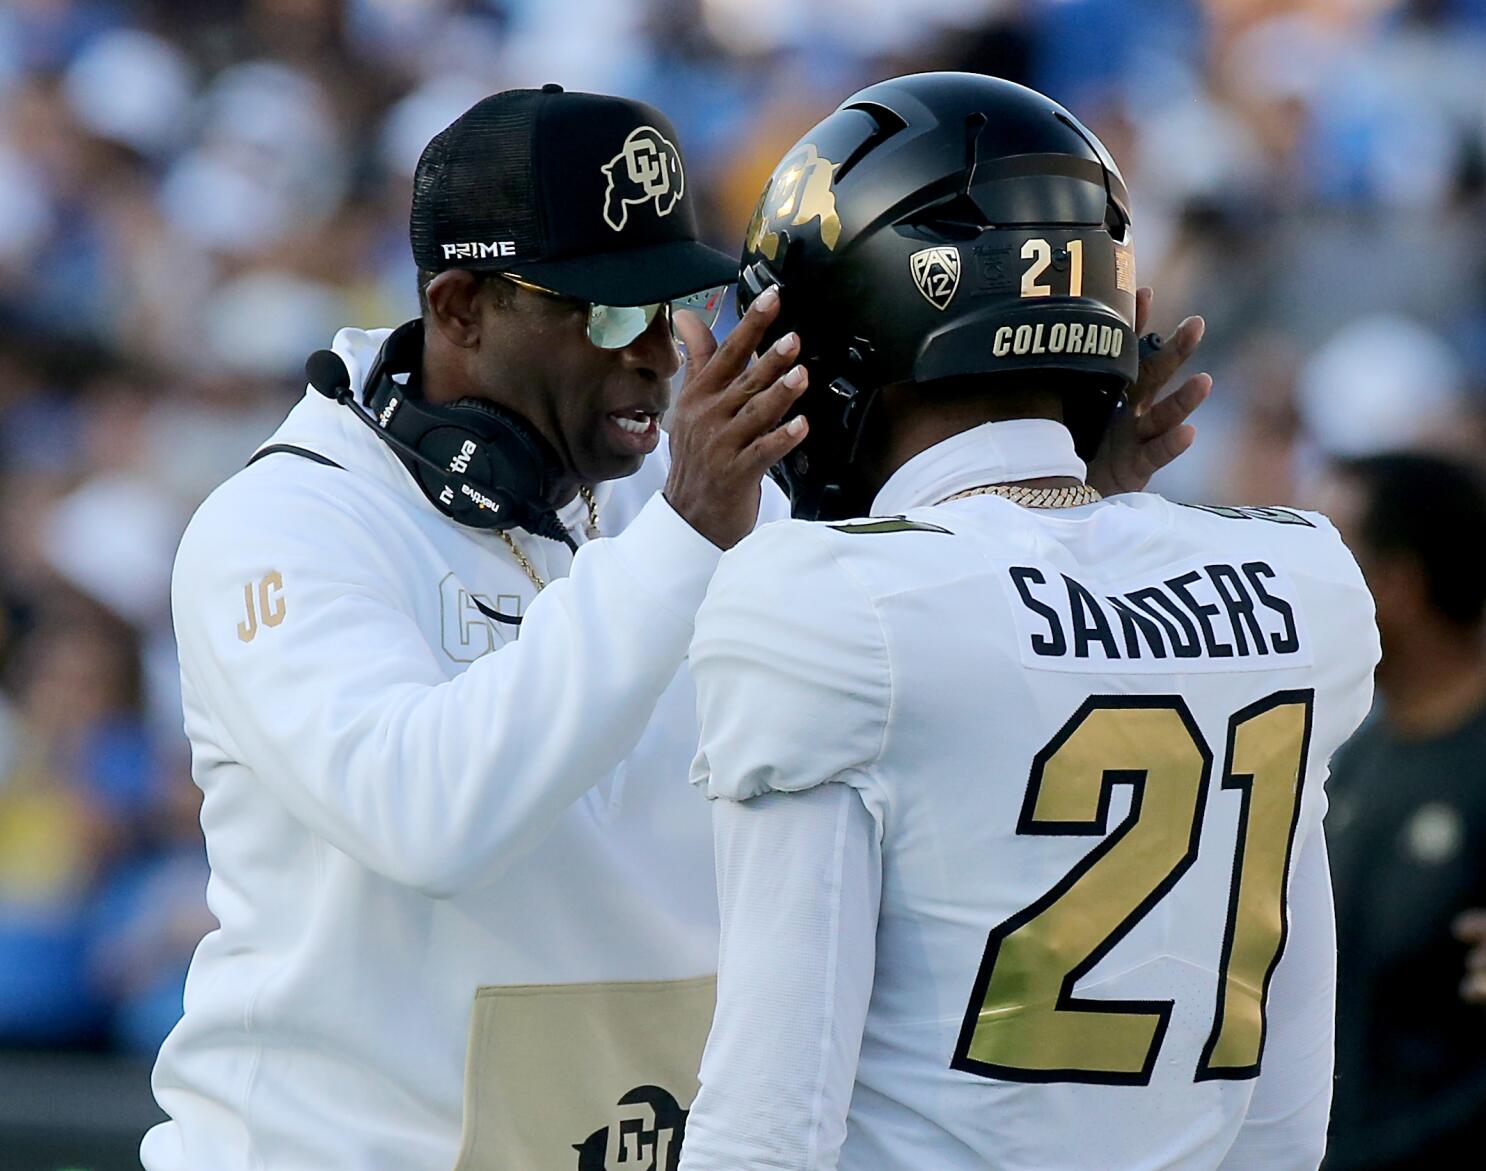 Colorado Hiring Deion Sanders Will Be Constant Gift for College